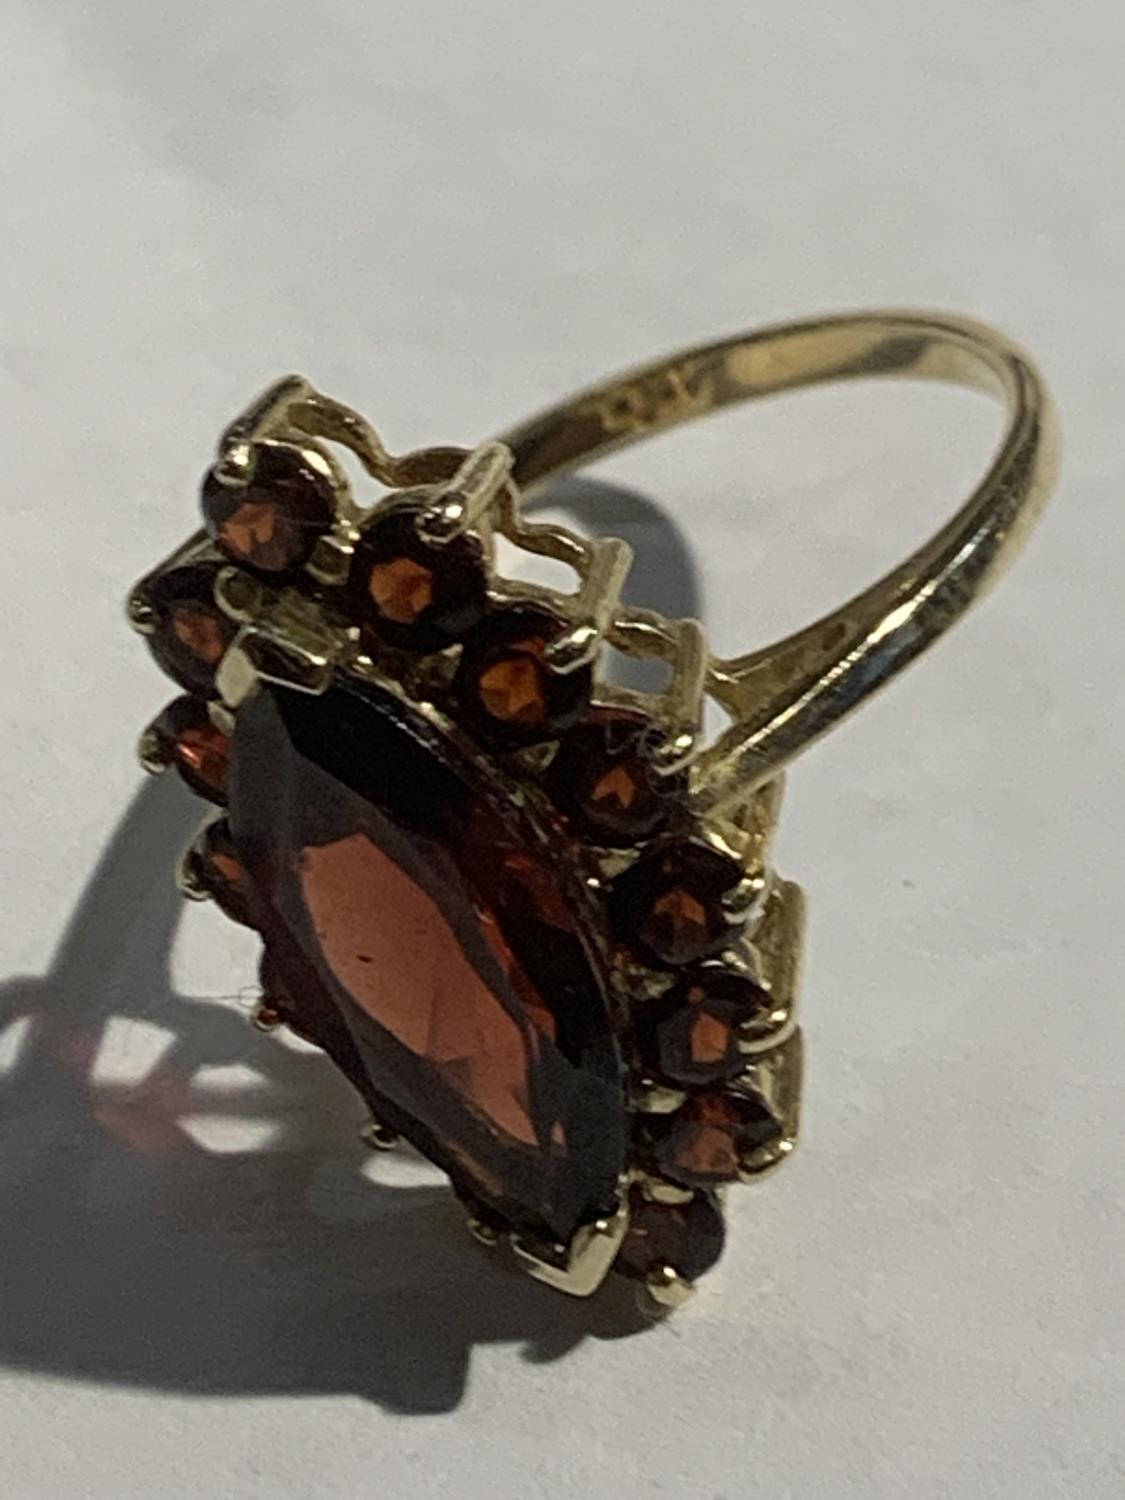 A 9 CARAT GOLD RING MARKED 375 WITH A LARGE RED STONE SIZE P GROSS WEIGHT 3.7 GRAMS - Image 3 of 3